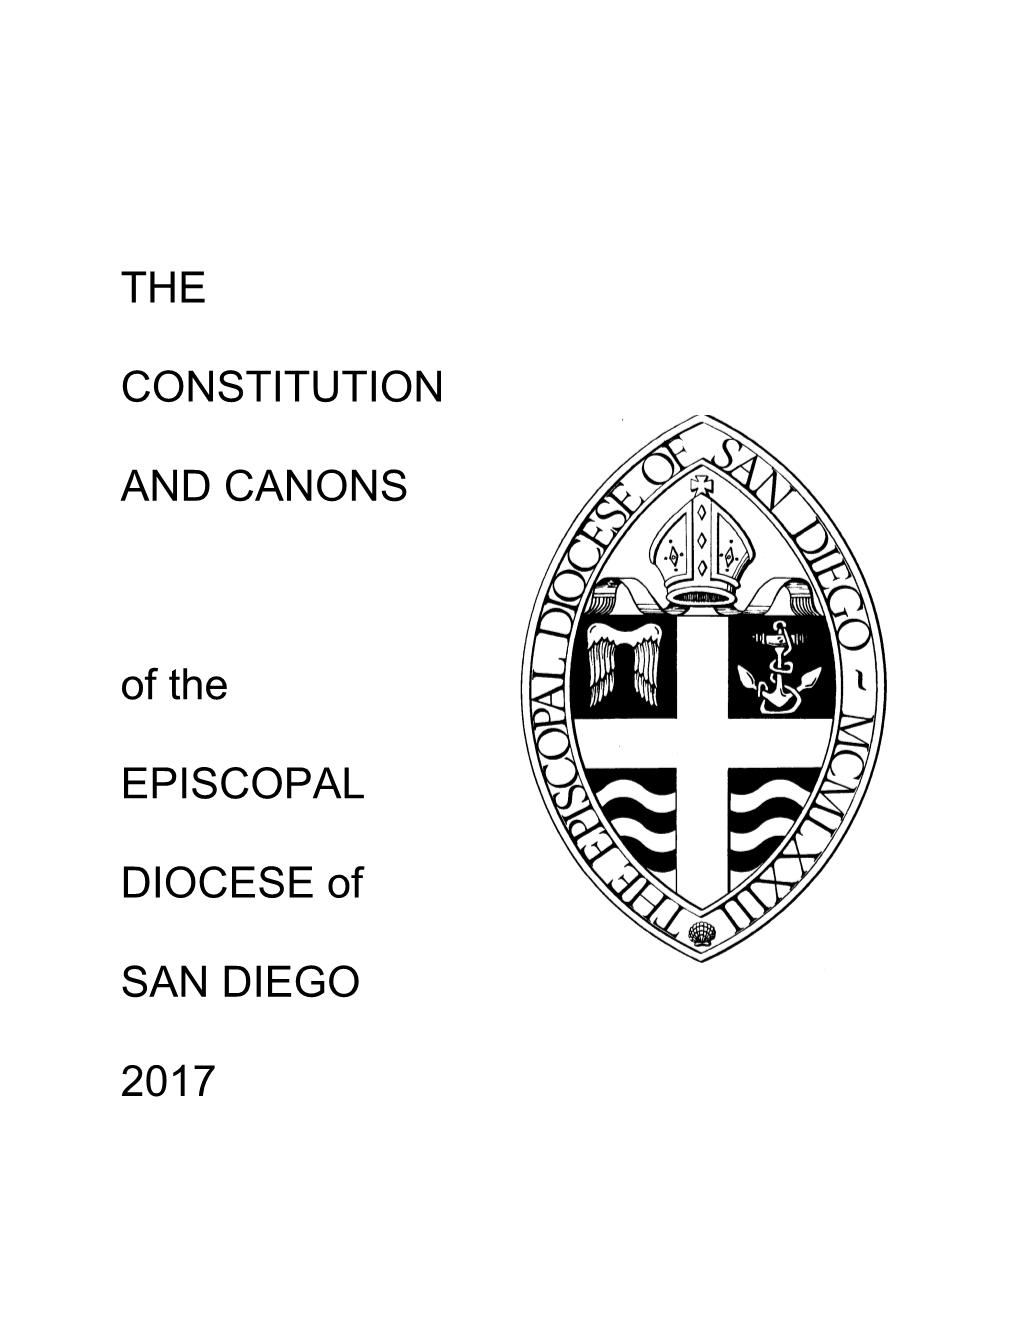 THE CONSTITUTION and CANONS of the EPISCOPAL DIOCESE of SAN DIEGO 2017